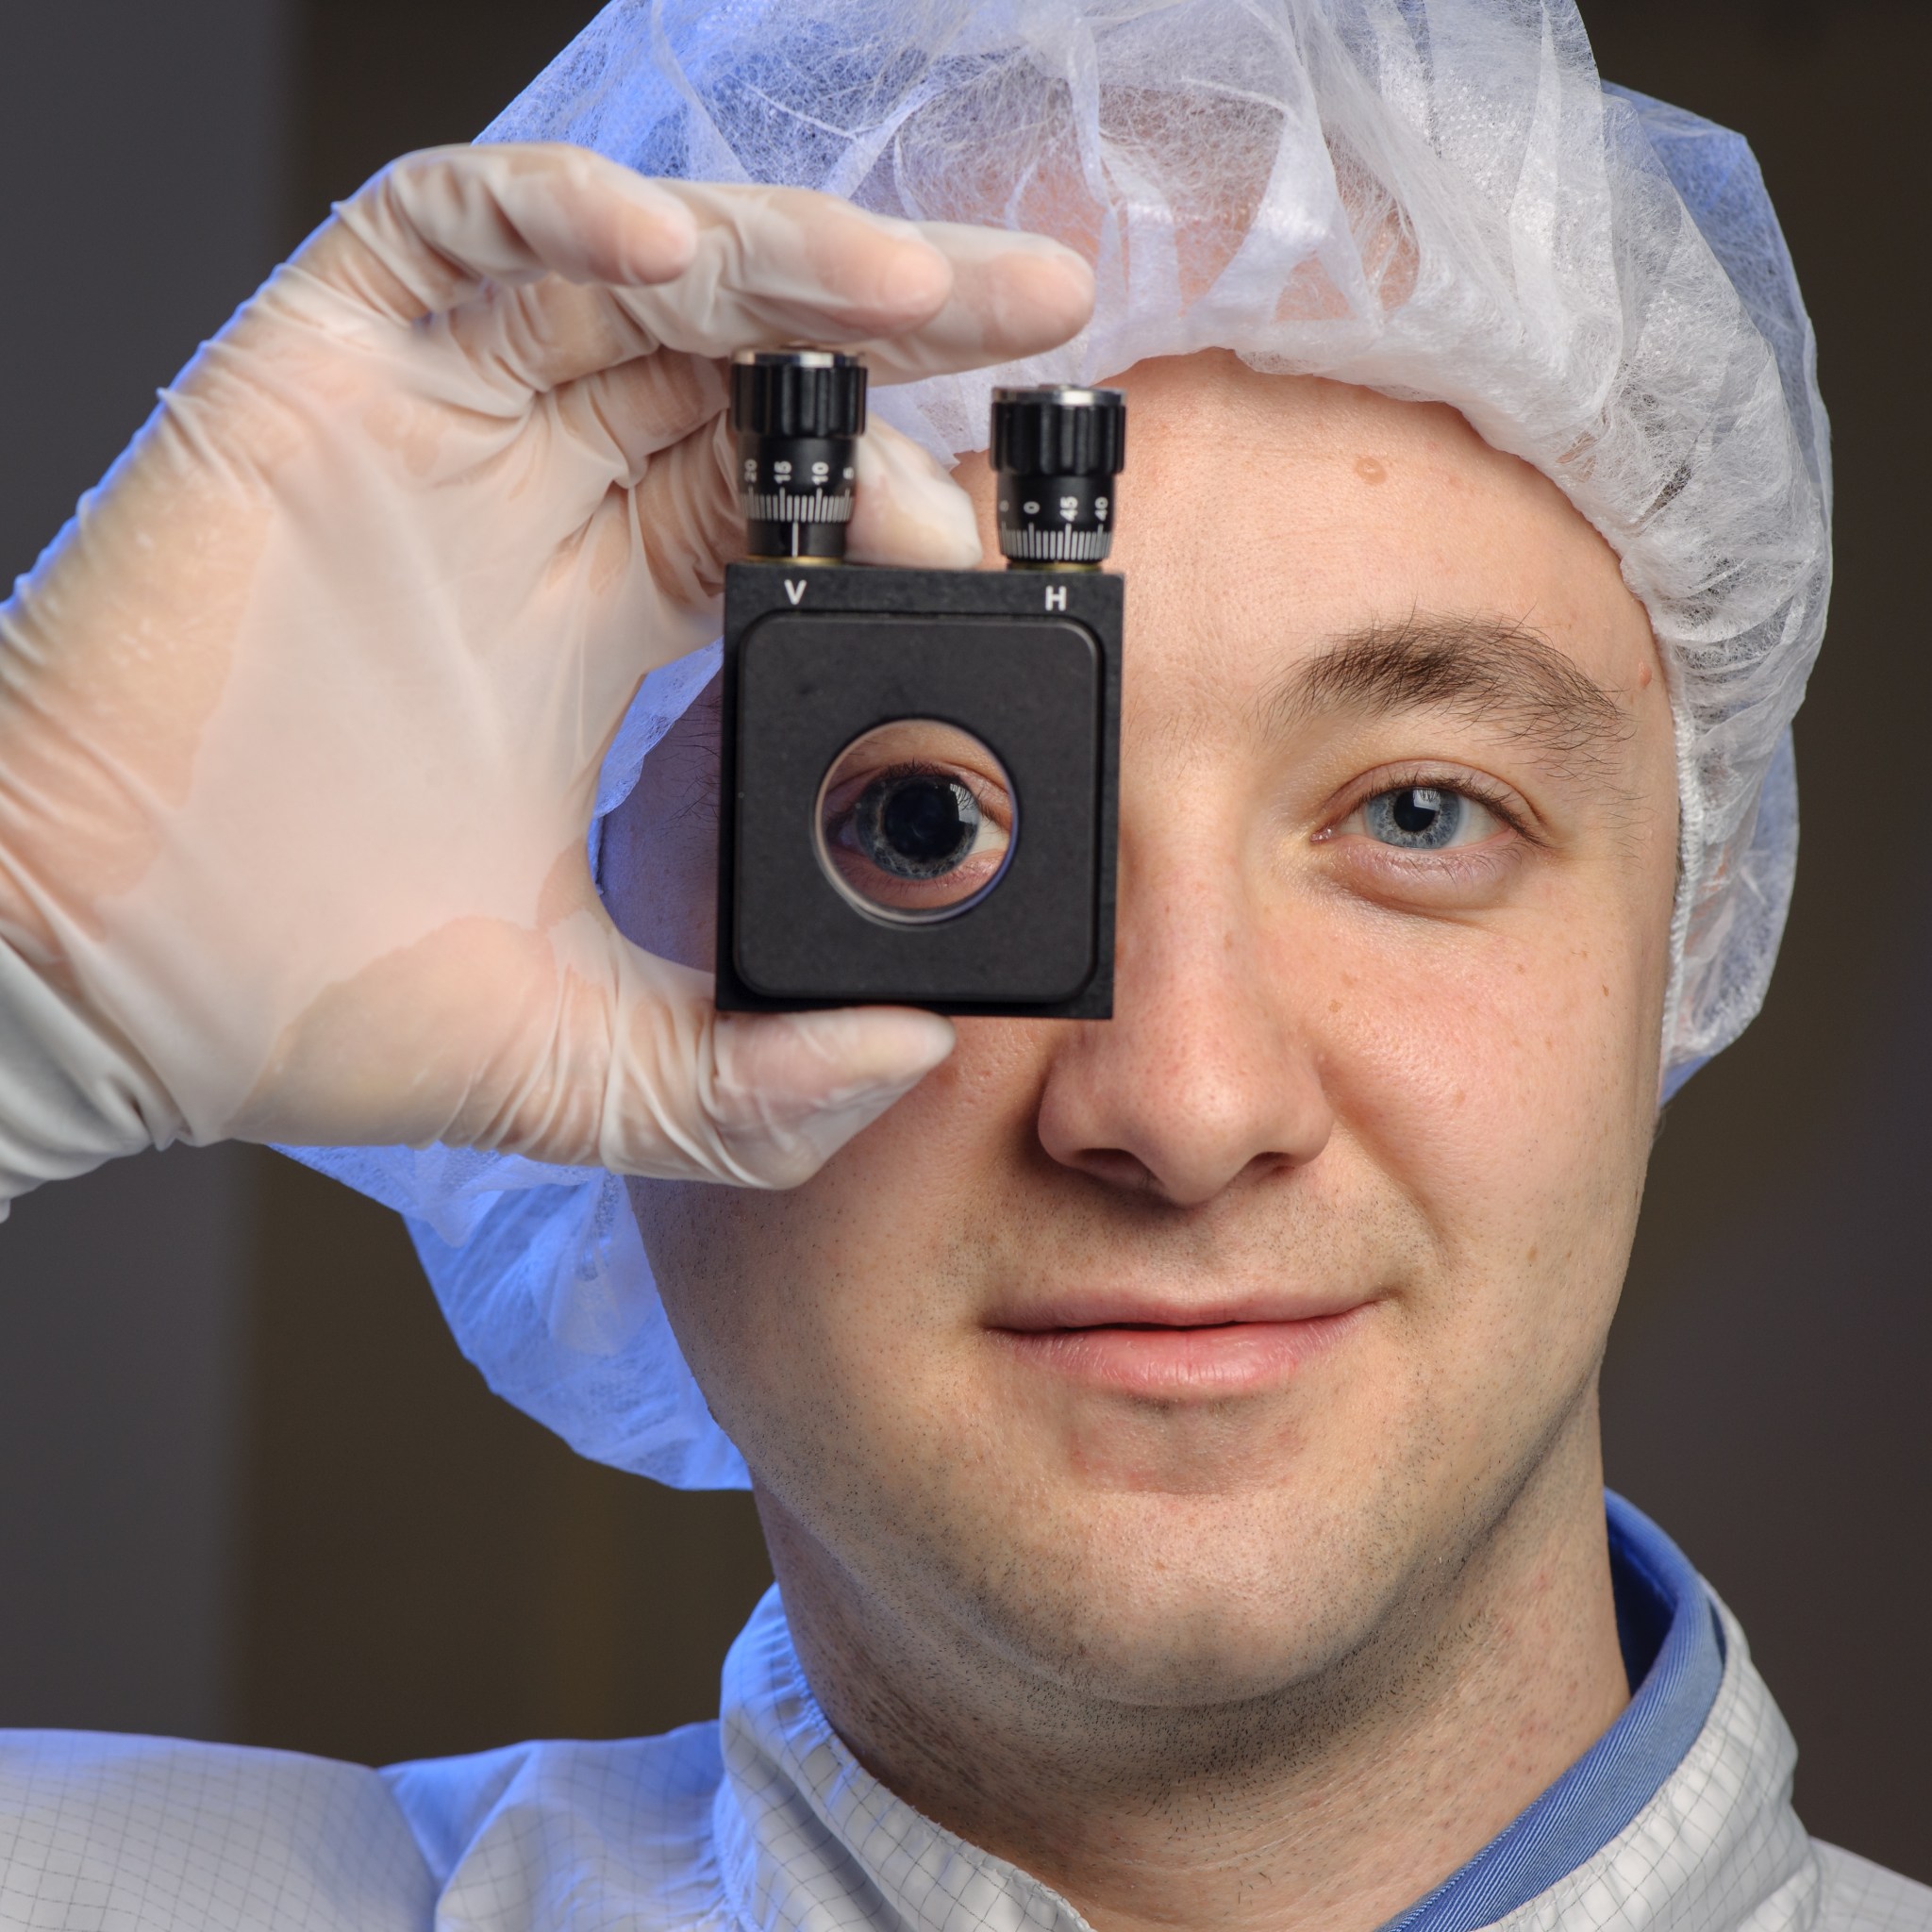 A man holding up a device to his eye, wearing gloves and a hairnet.